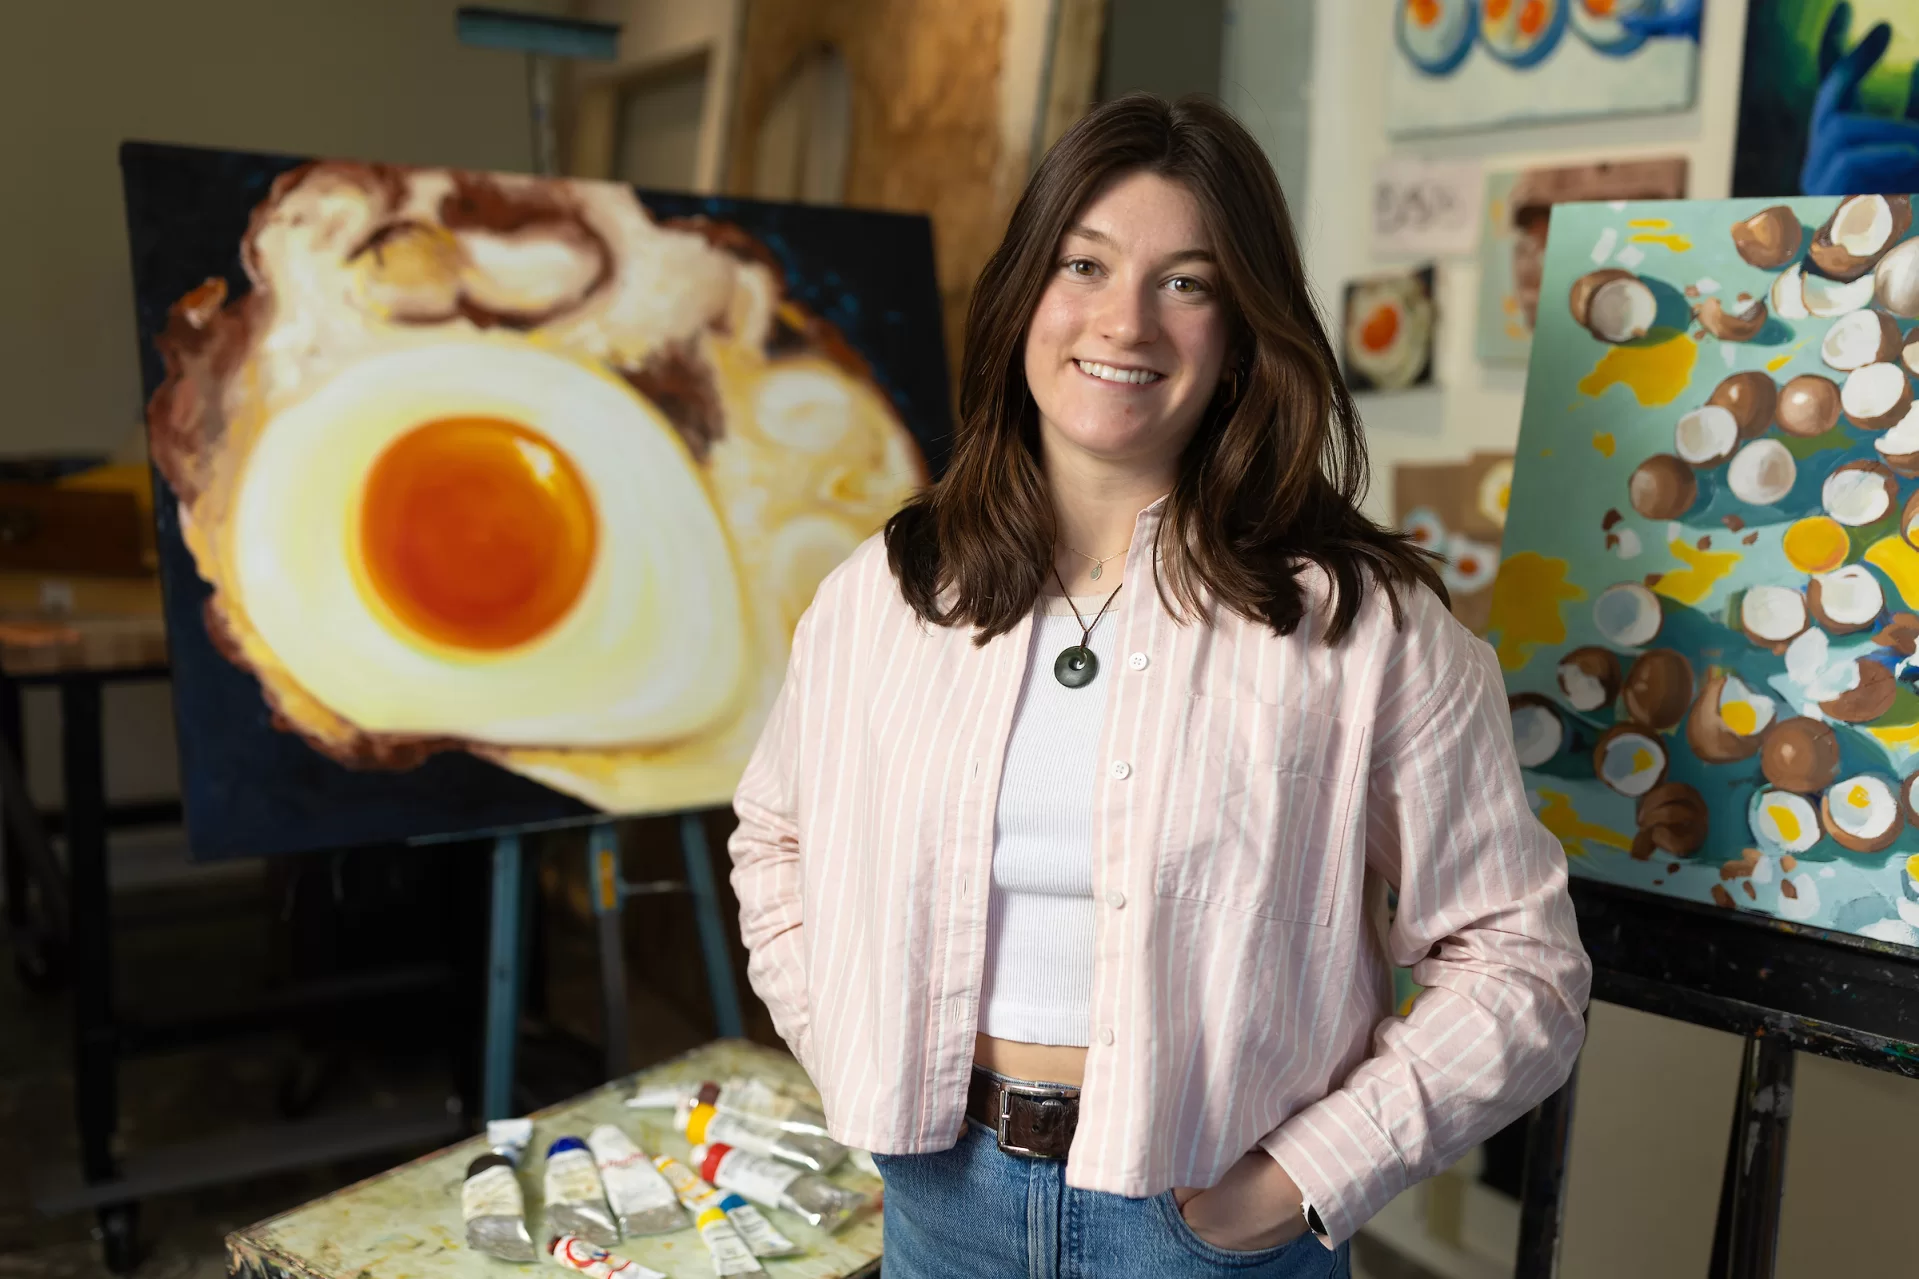 Studio art major Avery Mathias ’24 of Needham Heights, Mass., in her Olin Arts Center studio with her paintings for her senior exhibition.

Artist Statement
“My body of work seeks to focus on the mundane as a worthy subject matter to explore light, color, and the beauty in the ordinary. I have focused on a single subject—the chicken egg— as it is a universally recognizable object that is often overlooked. Given that the chicken egg is so common, it is accompanied by a variety of connotations that the audience can examine with the work. Combined with the striking contrast of the yellow-orange yolk with egg whites, the chicken egg encapsulates the concept of finding intrigue and beauty in the mundane.

In order to emulate traditional still life painting, I stretched and gessoed the canvases by hand and used oil paint as my medium. While I was inspired by historical still lives by female artists such as Gluck (Hannah Gluckstein), Ethel Sands, and Vanessa Bell, I was also influenced by the modern still life painter Leah Gardner. She is a young, self-taught artist whose work consists of a series of common objects captured with bright colors on a plain background. Her use of light and color inspired me to focus on daily life and the functioning of seemingly insignificant mechanisms which led to my involvement with biology and cooking.

I have particularly fond memories of making breakfast with my father on the weekends as a kid and enjoy food and how a shared meal brings people together. While food and people’s relationship with it comes with a range of emotions and connotations, everyone can recognize and connect to the symbol of a fried egg. In addition to providing valuable nutrition, an egg can symbolize or invite other associations such as life and sexuality. The lack of context included in my work invites the audience to bring their own associations and significance to each piece. The egg is also the epitome of routine as a chicken lays one egg every day a